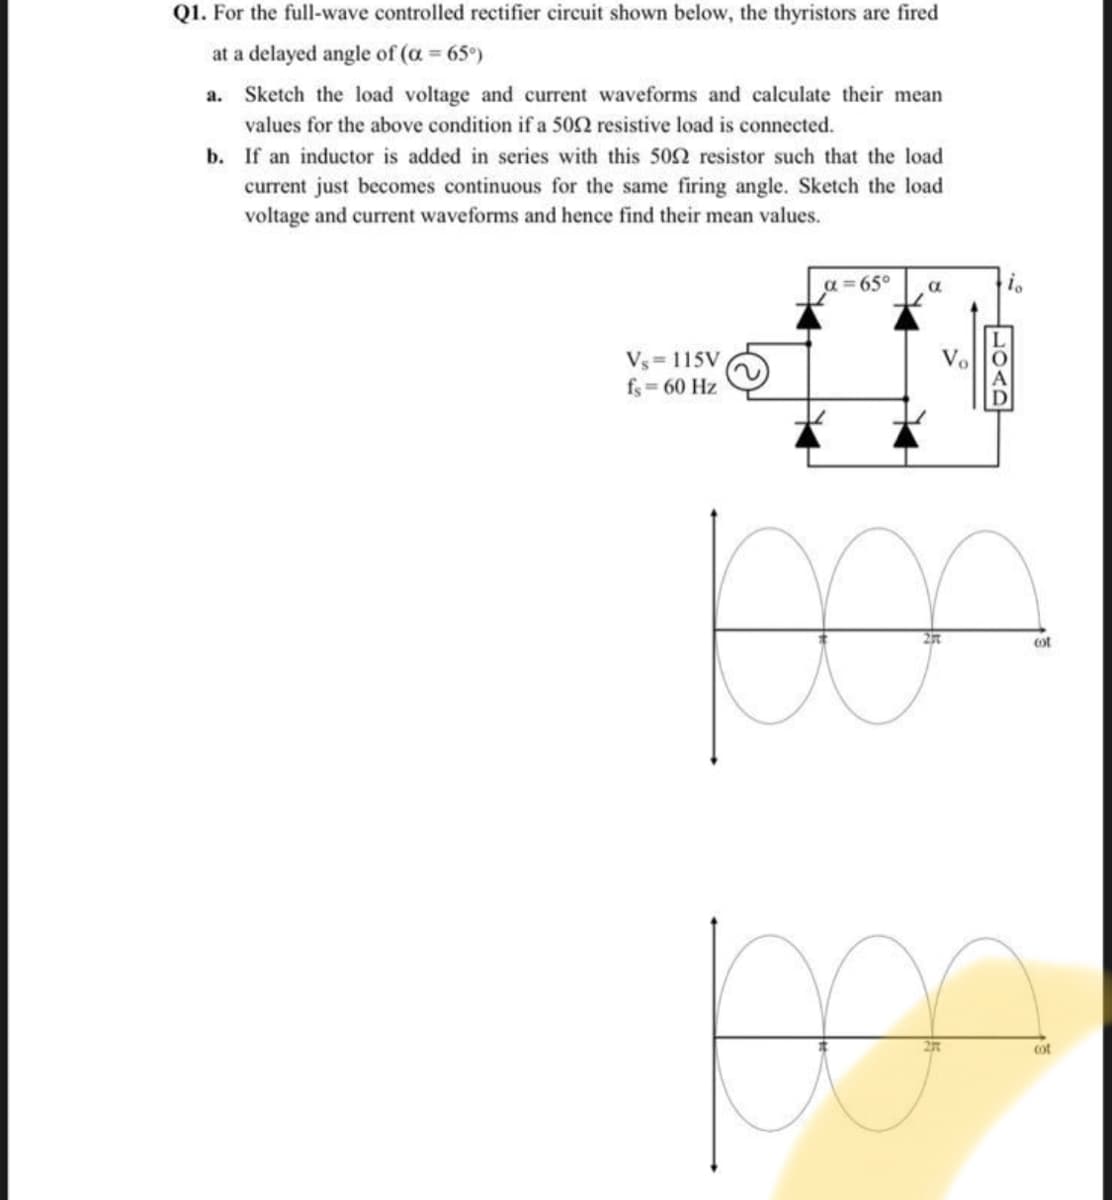 Q1. For the full-wave controlled rectifier circuit shown below, the thyristors are fired
at a delayed angle of (a = 65°)
%3D
a. Sketch the load voltage and current waveforms and calculate their mean
values for the above condition if a 502 resistive load is connected.
b. If an inductor is added in series with this 502 resistor such that the load
current just becomes continuous for the same firing angle. Sketch the load
voltage and current waveforms and hence find their mean values.
a = 65°
Vs= 115V
fs = 60 Hz
Vo
ot
27T
cot
LOAD
